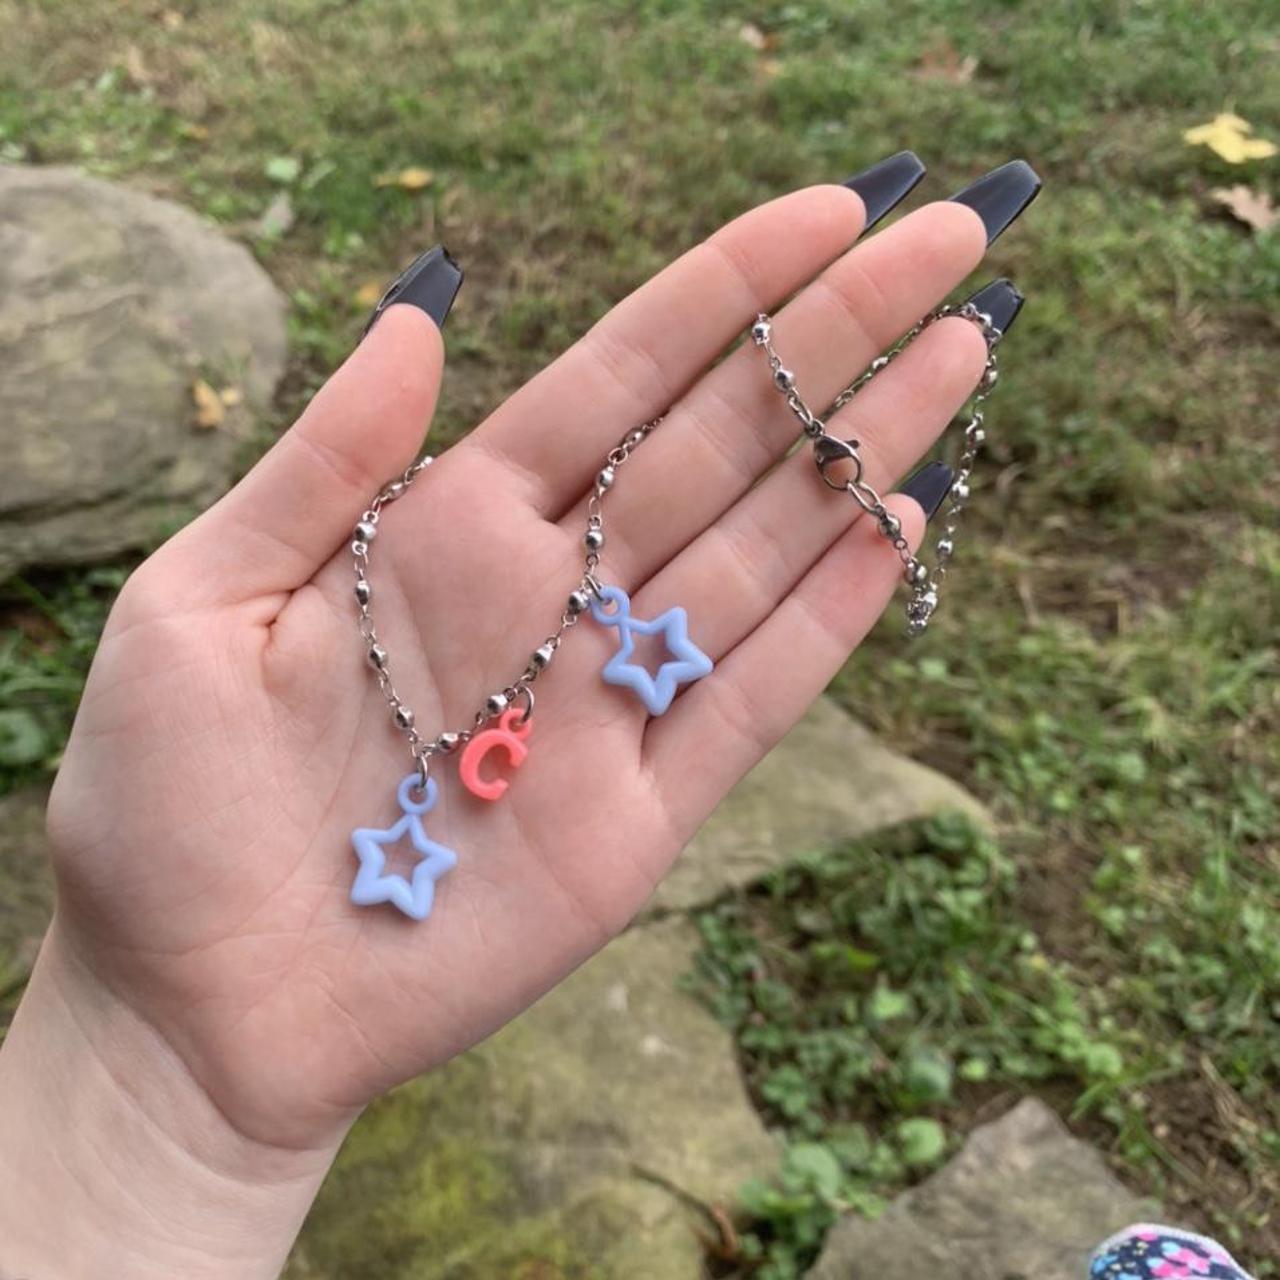 Product Image 2 - Custom letter necklaces! 🦋

Please message